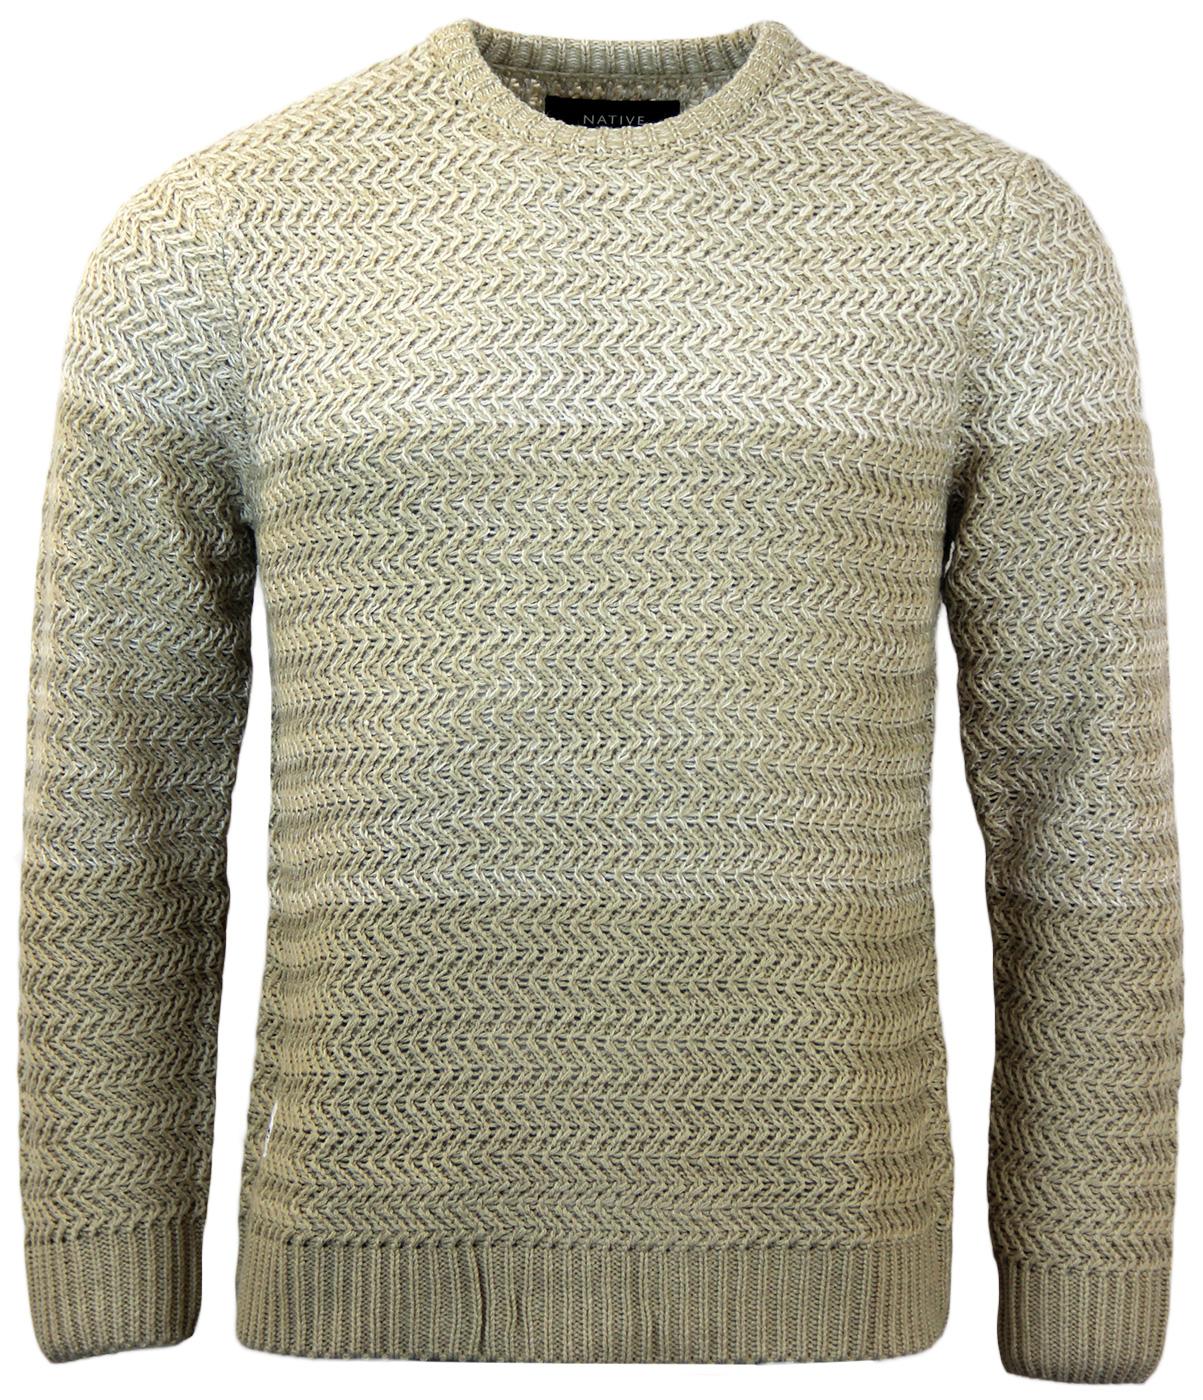 NATIVE YOUTH Retro Indie Ombre Knitted Jumper